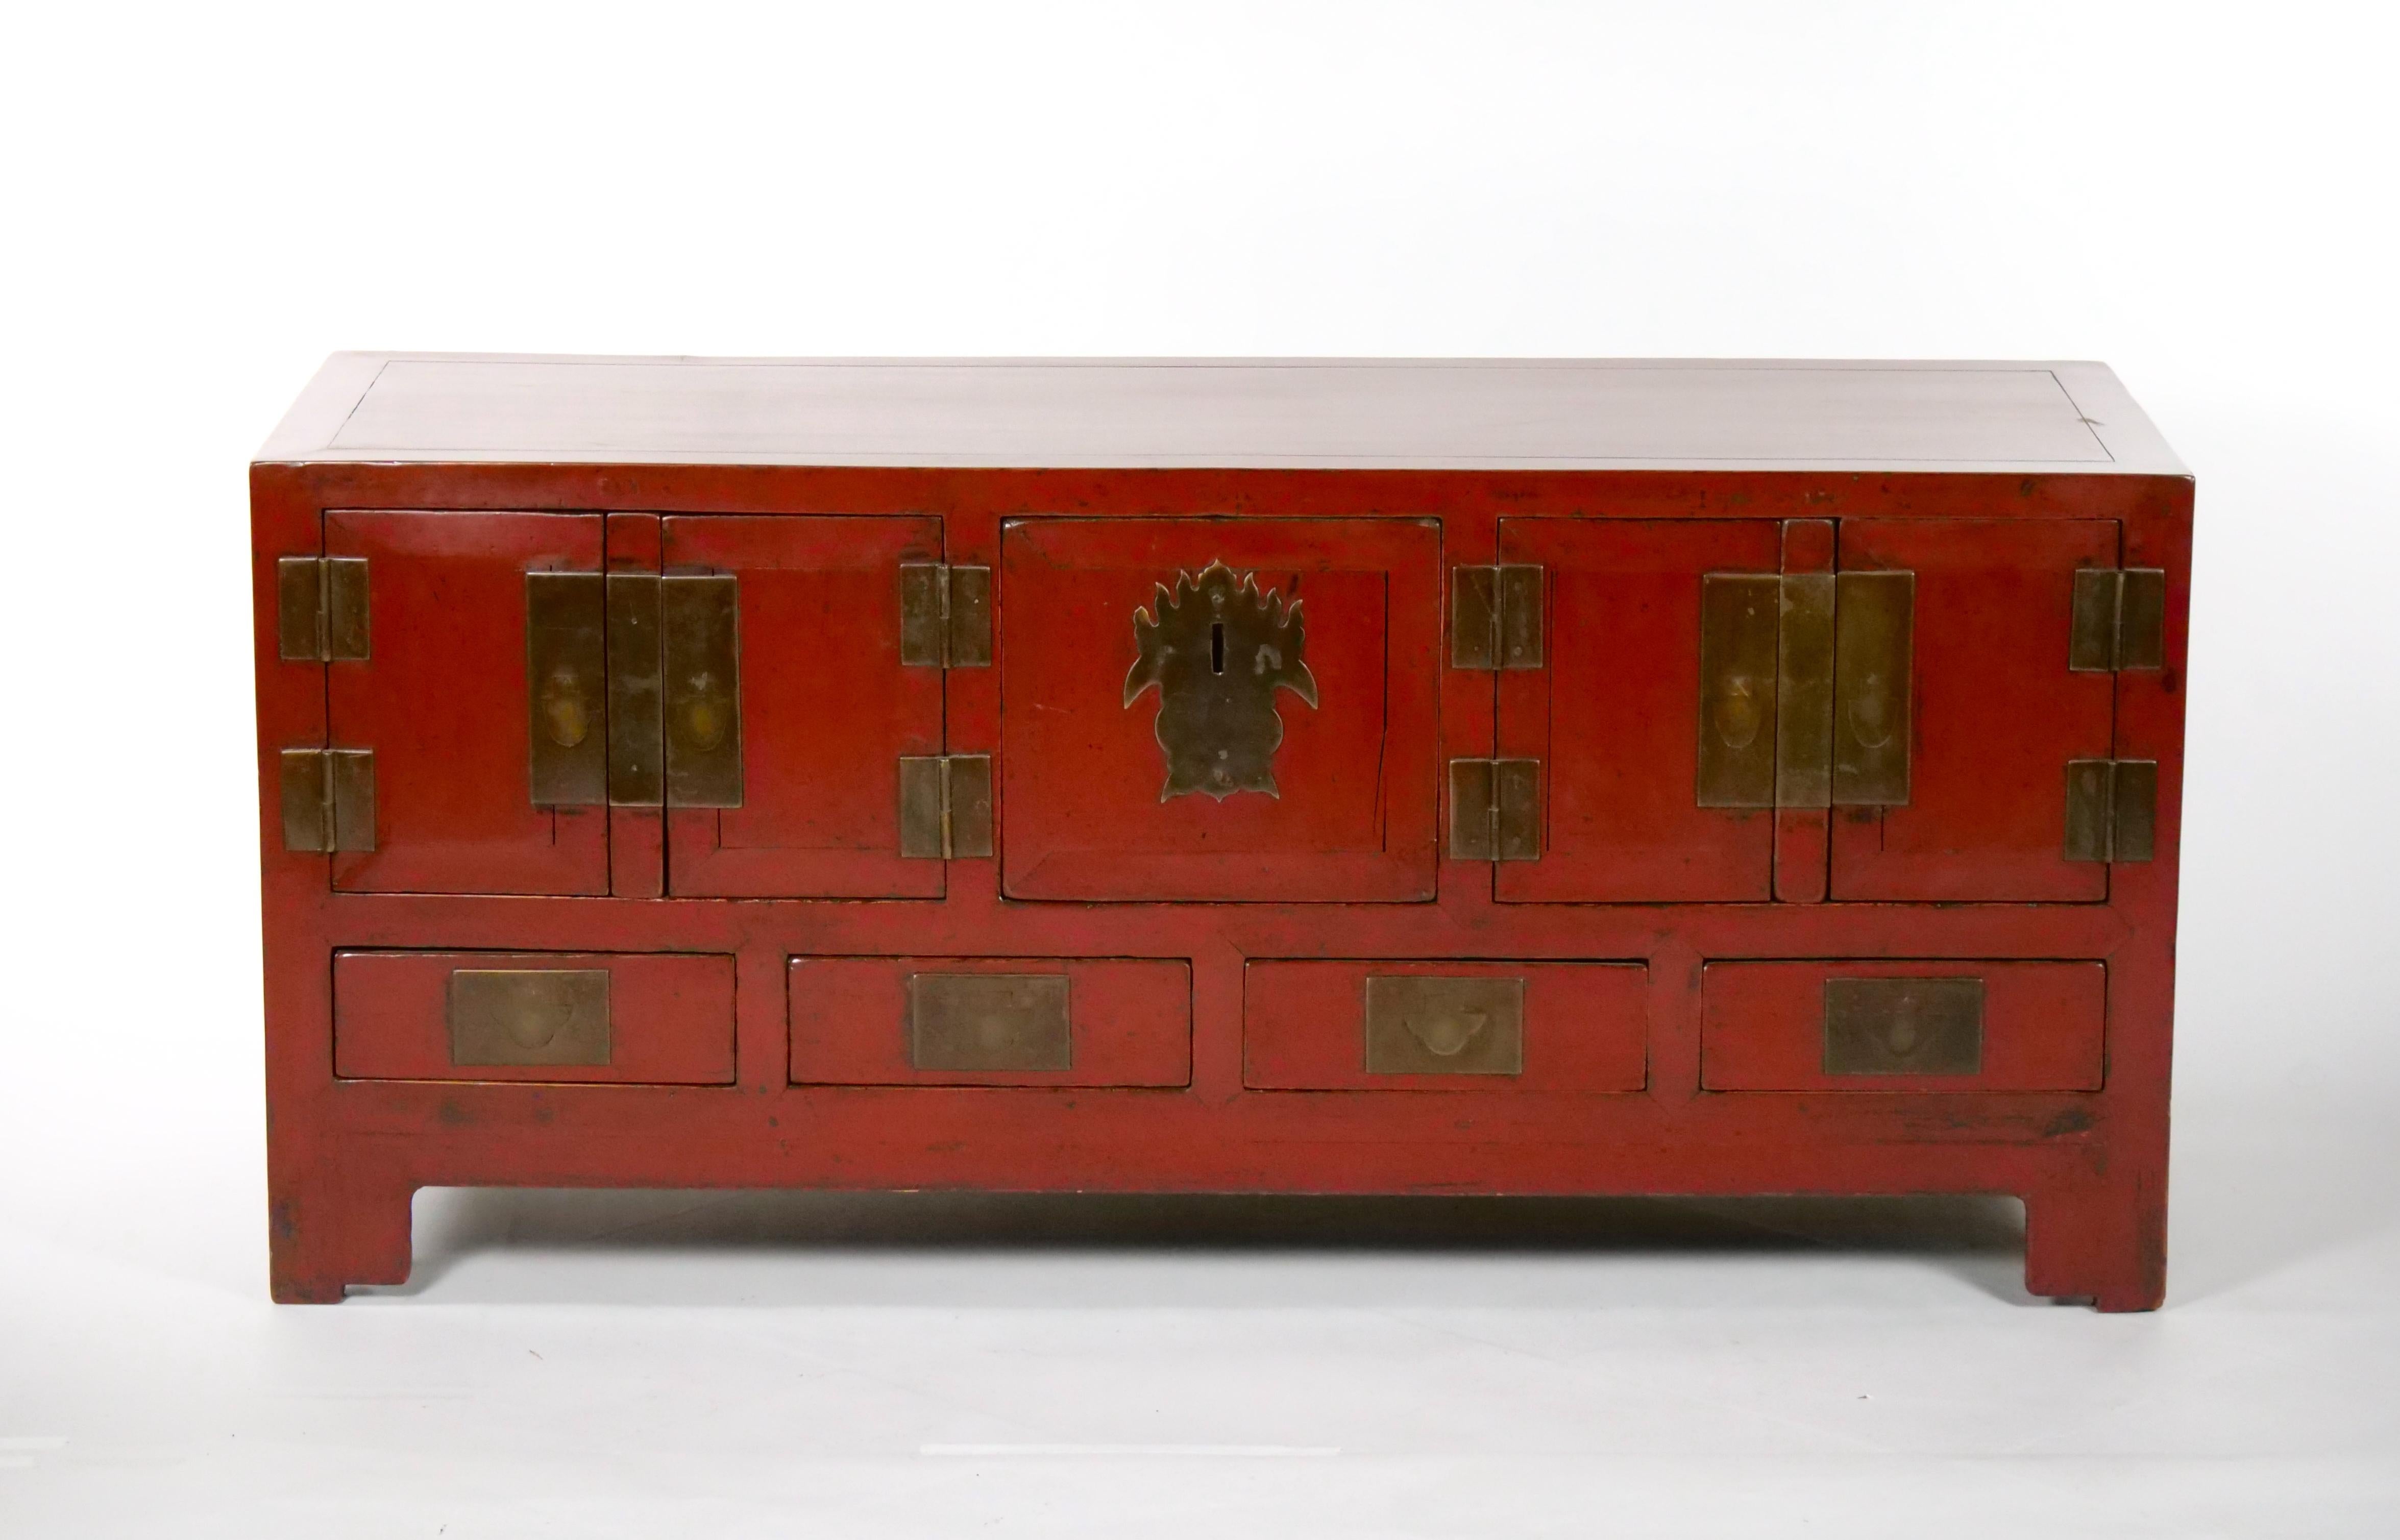 Beautiful red-lacquered Chinese sideboard / low center table was made from reclaimed pine wood with traditional nail-less joinery. The red lacquer has been enhanced with a sophisticated French polish finish and hardware decoration. This piece is